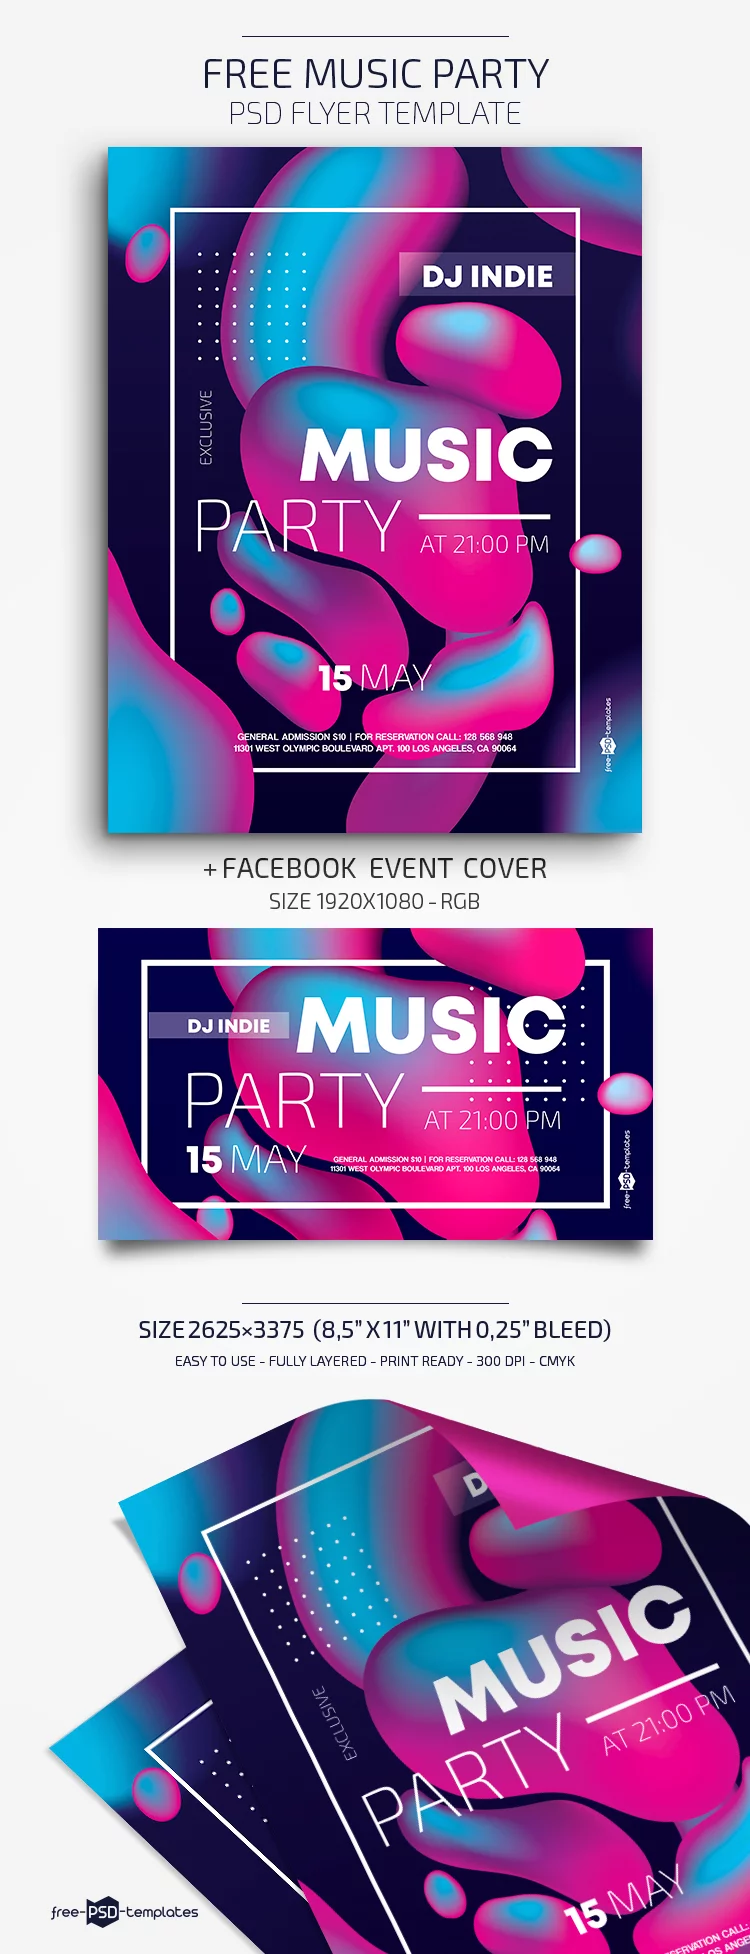 Free Music Party Flyer in PSD